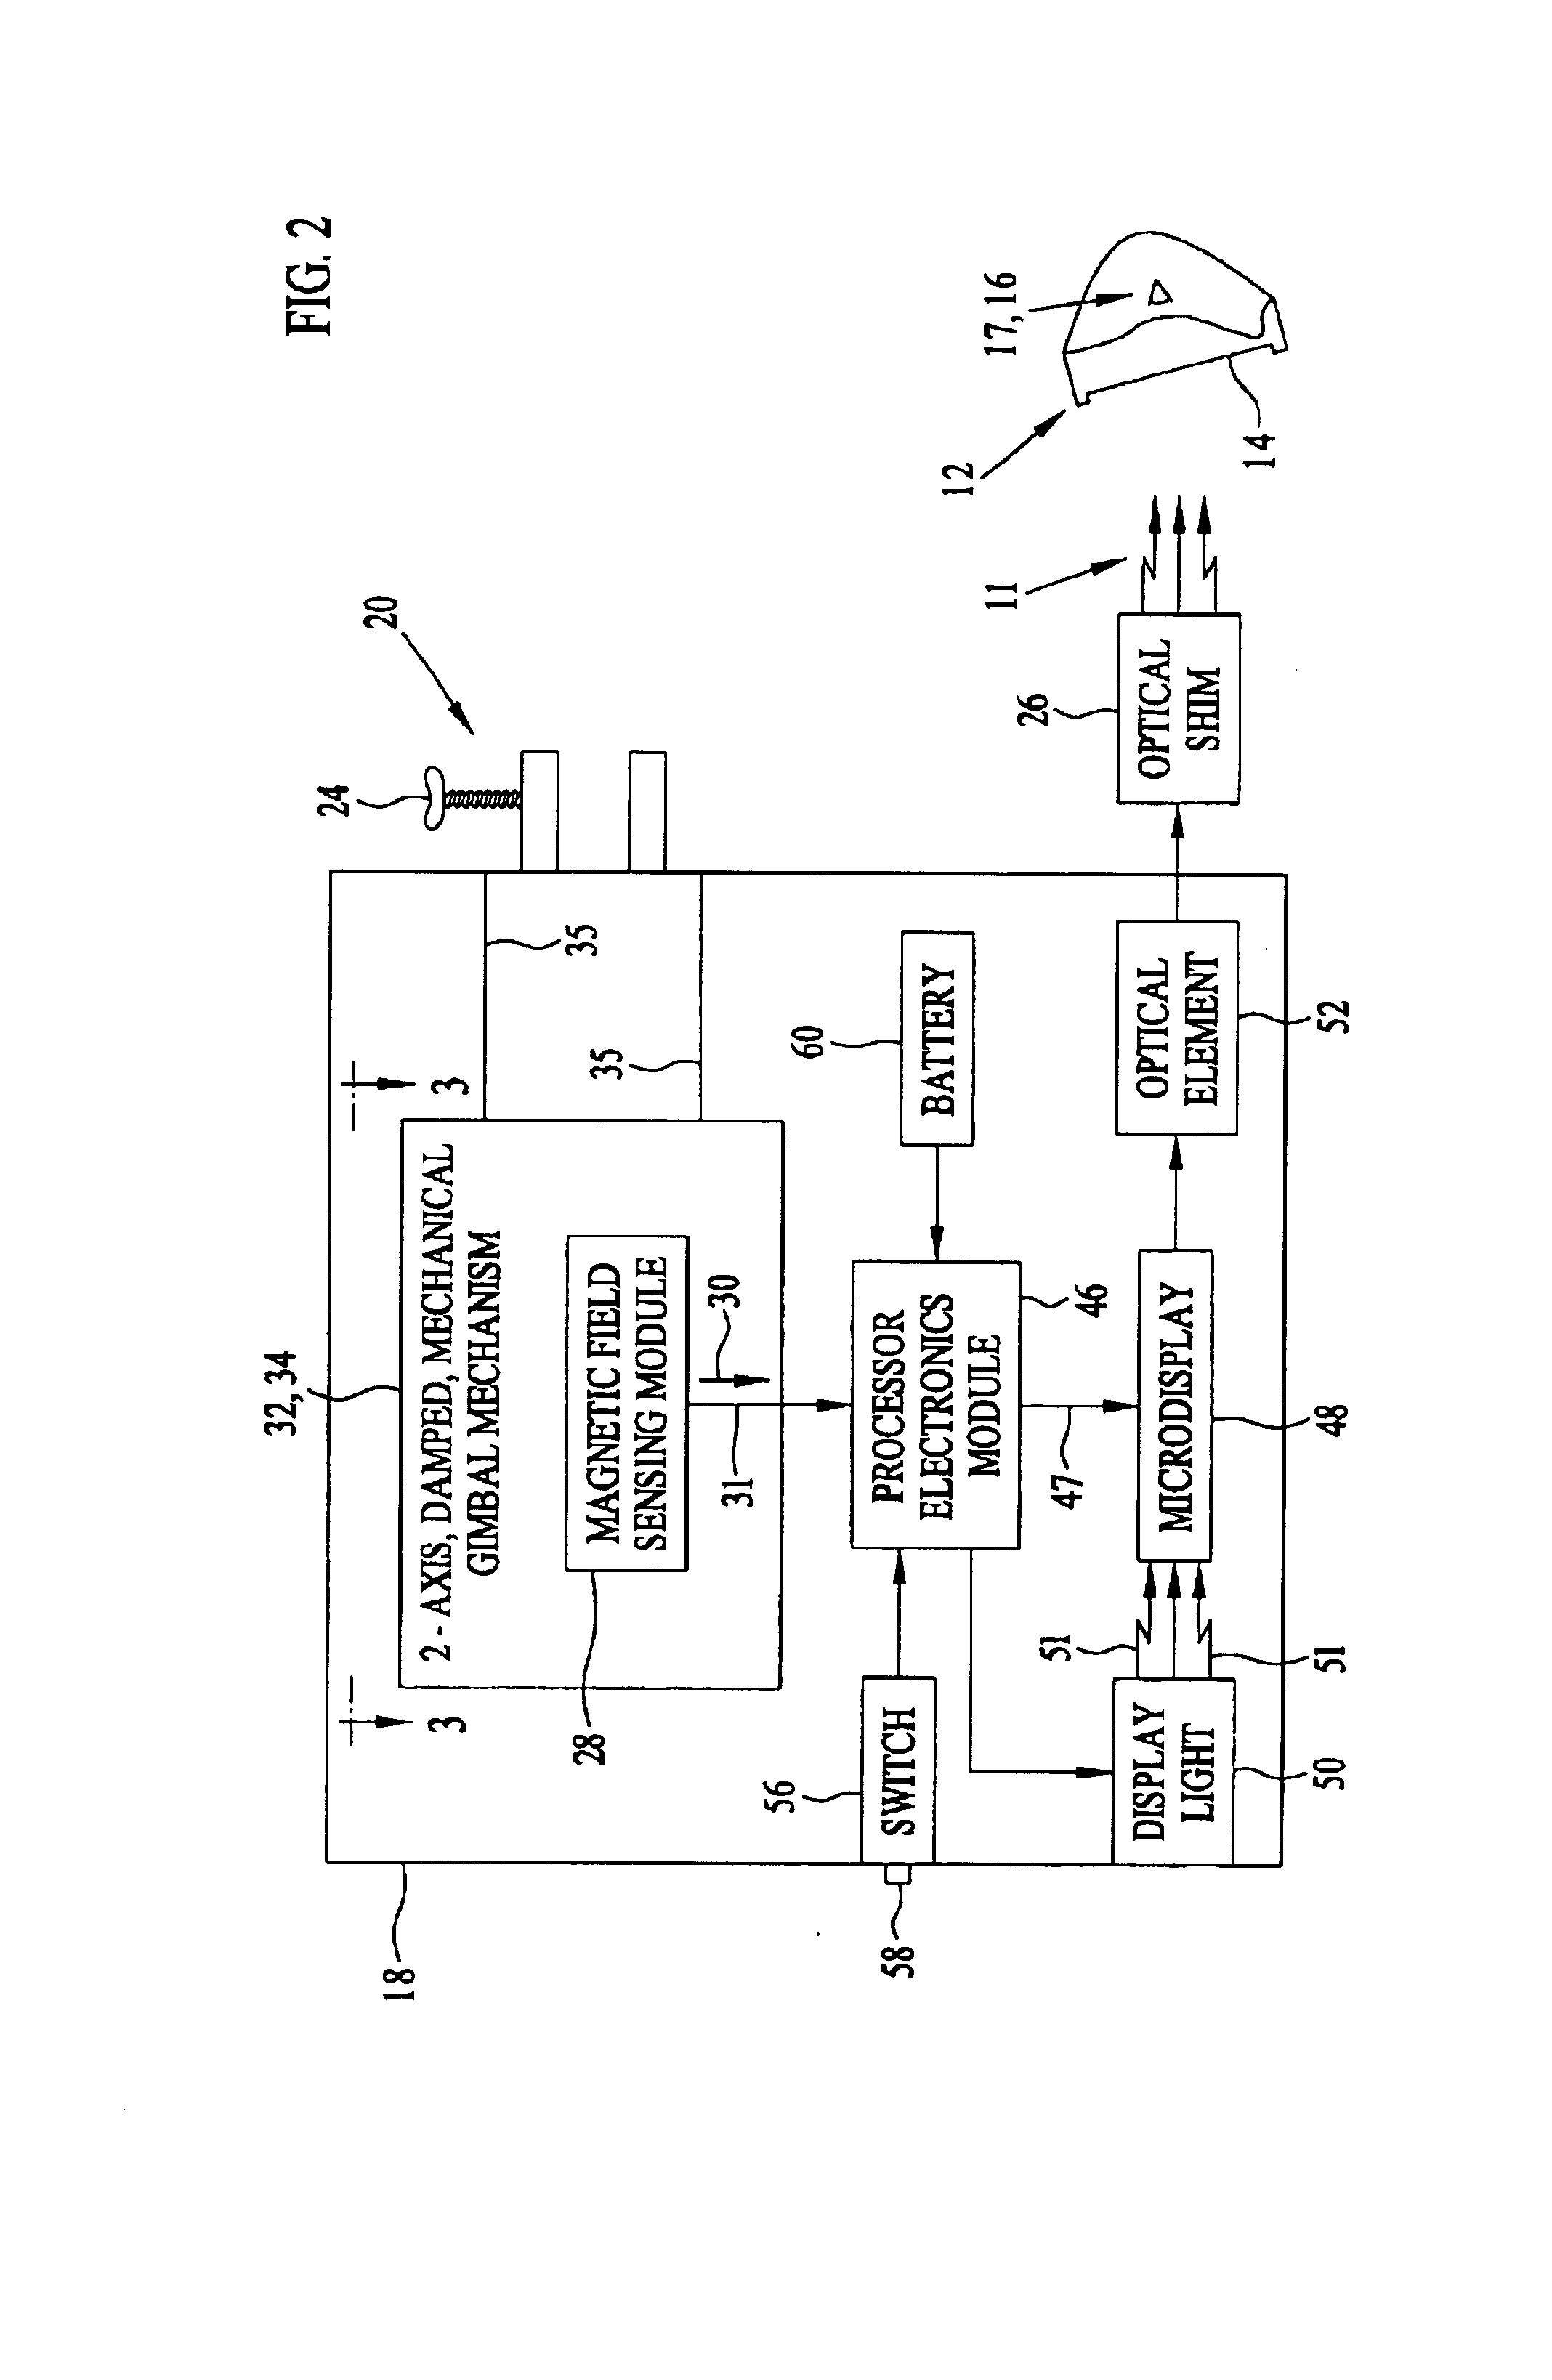 Small head-mounted compass system with optical display